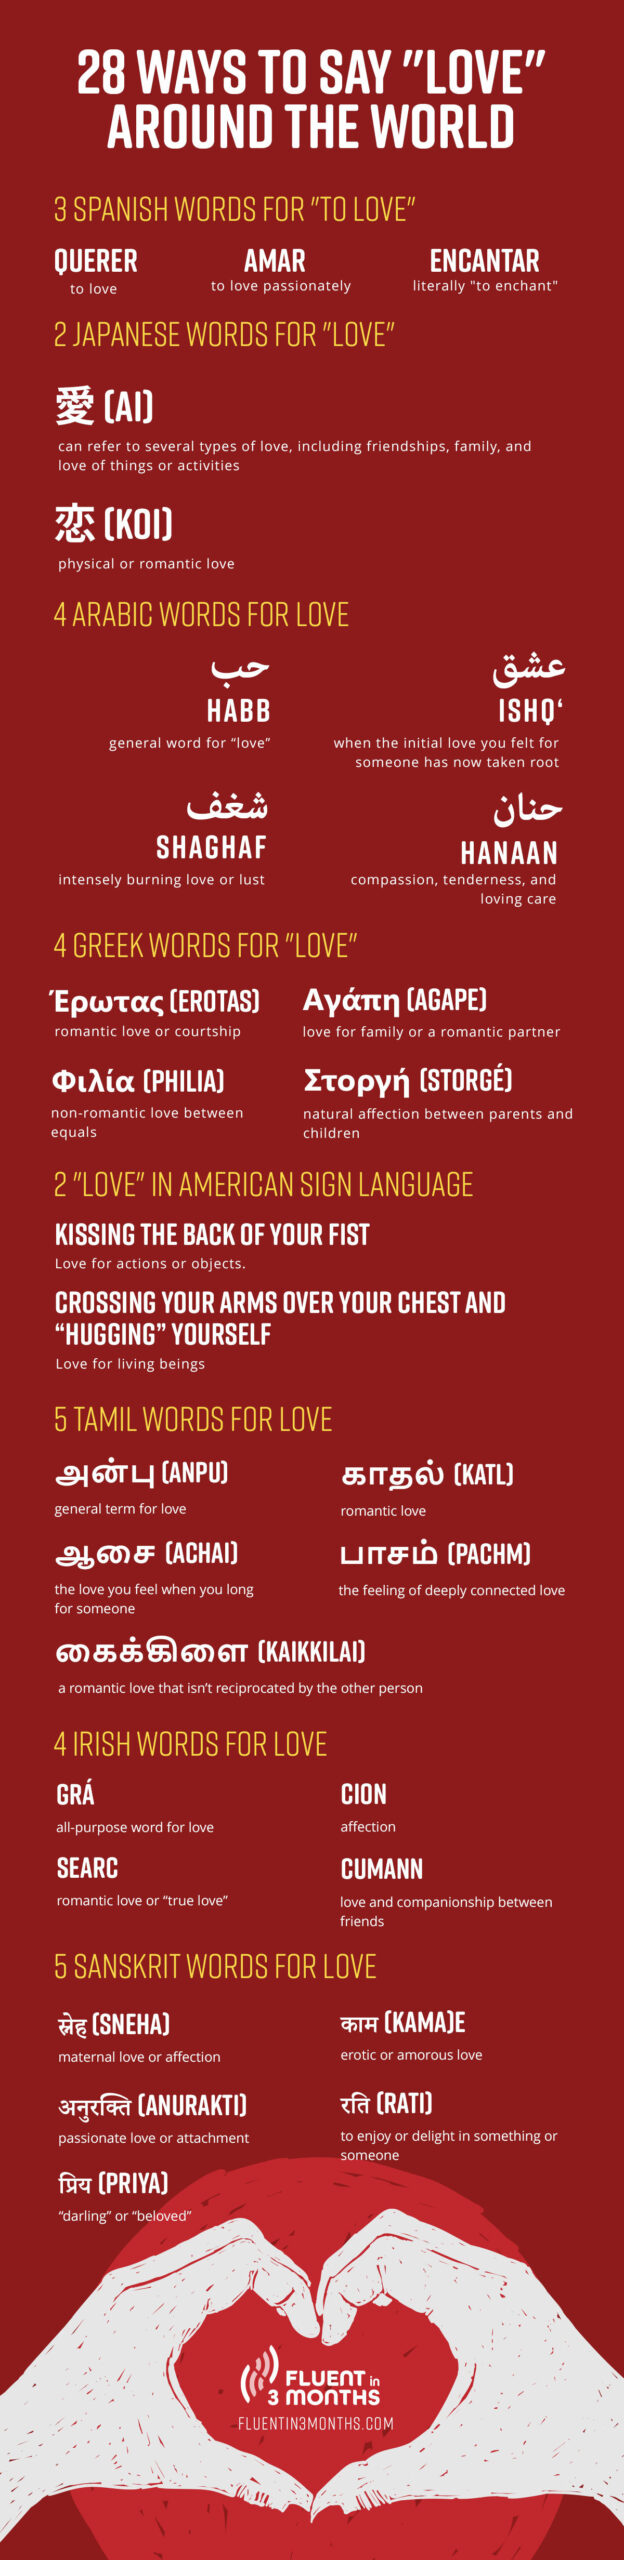 LOVE Synonym: List of 30+ Romantic Synonyms for Love in English